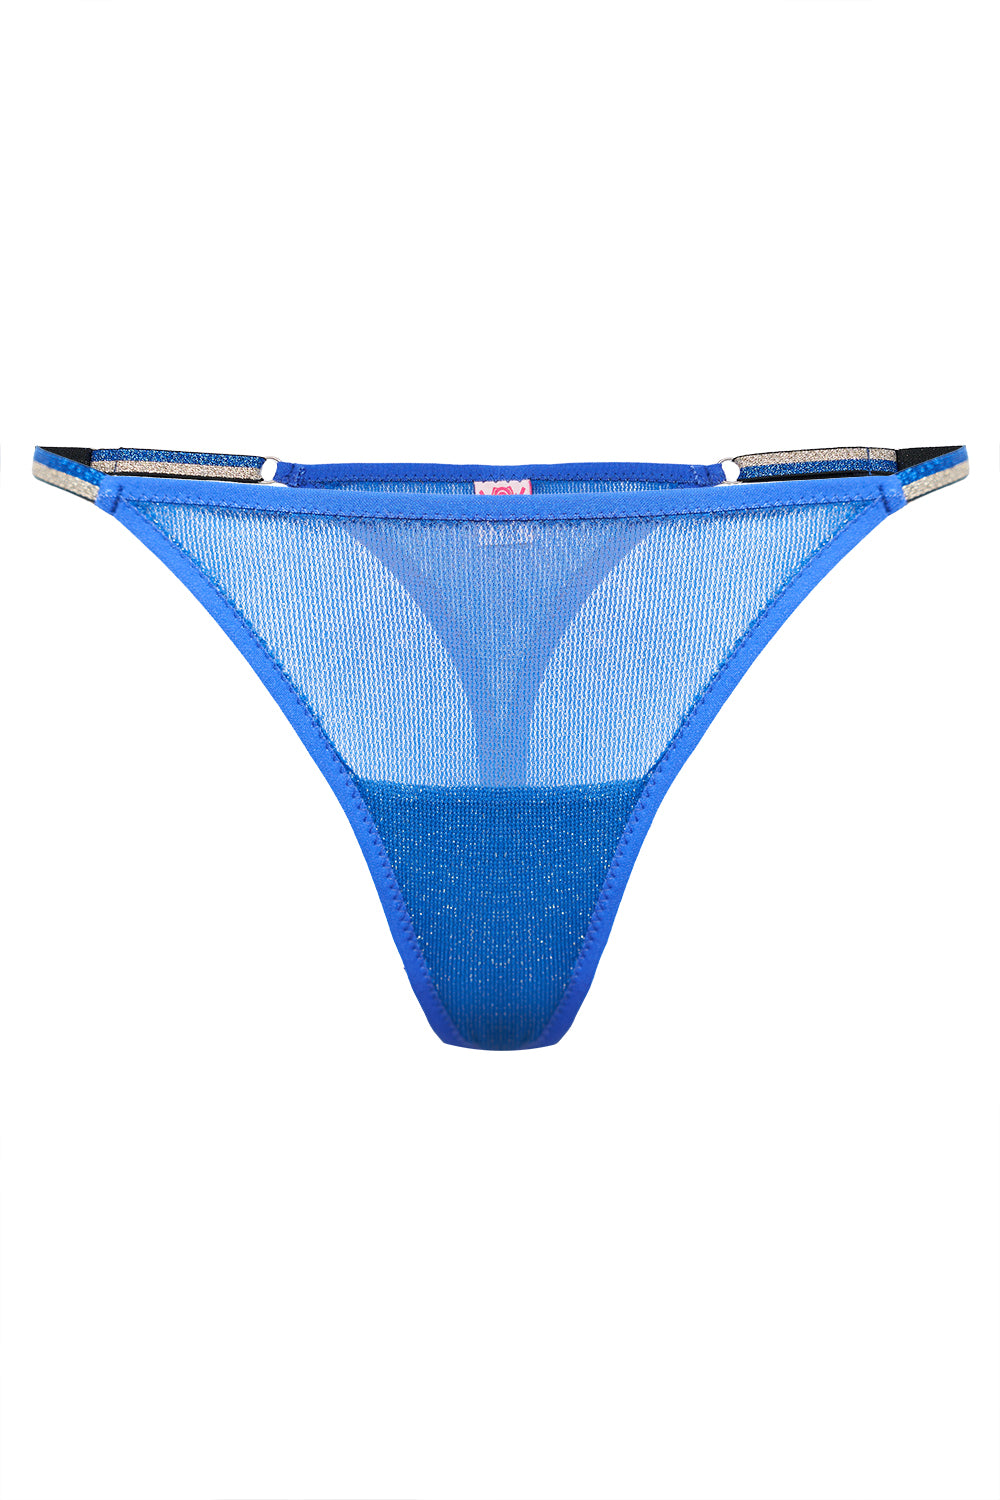 Wildly blue ultra thongs